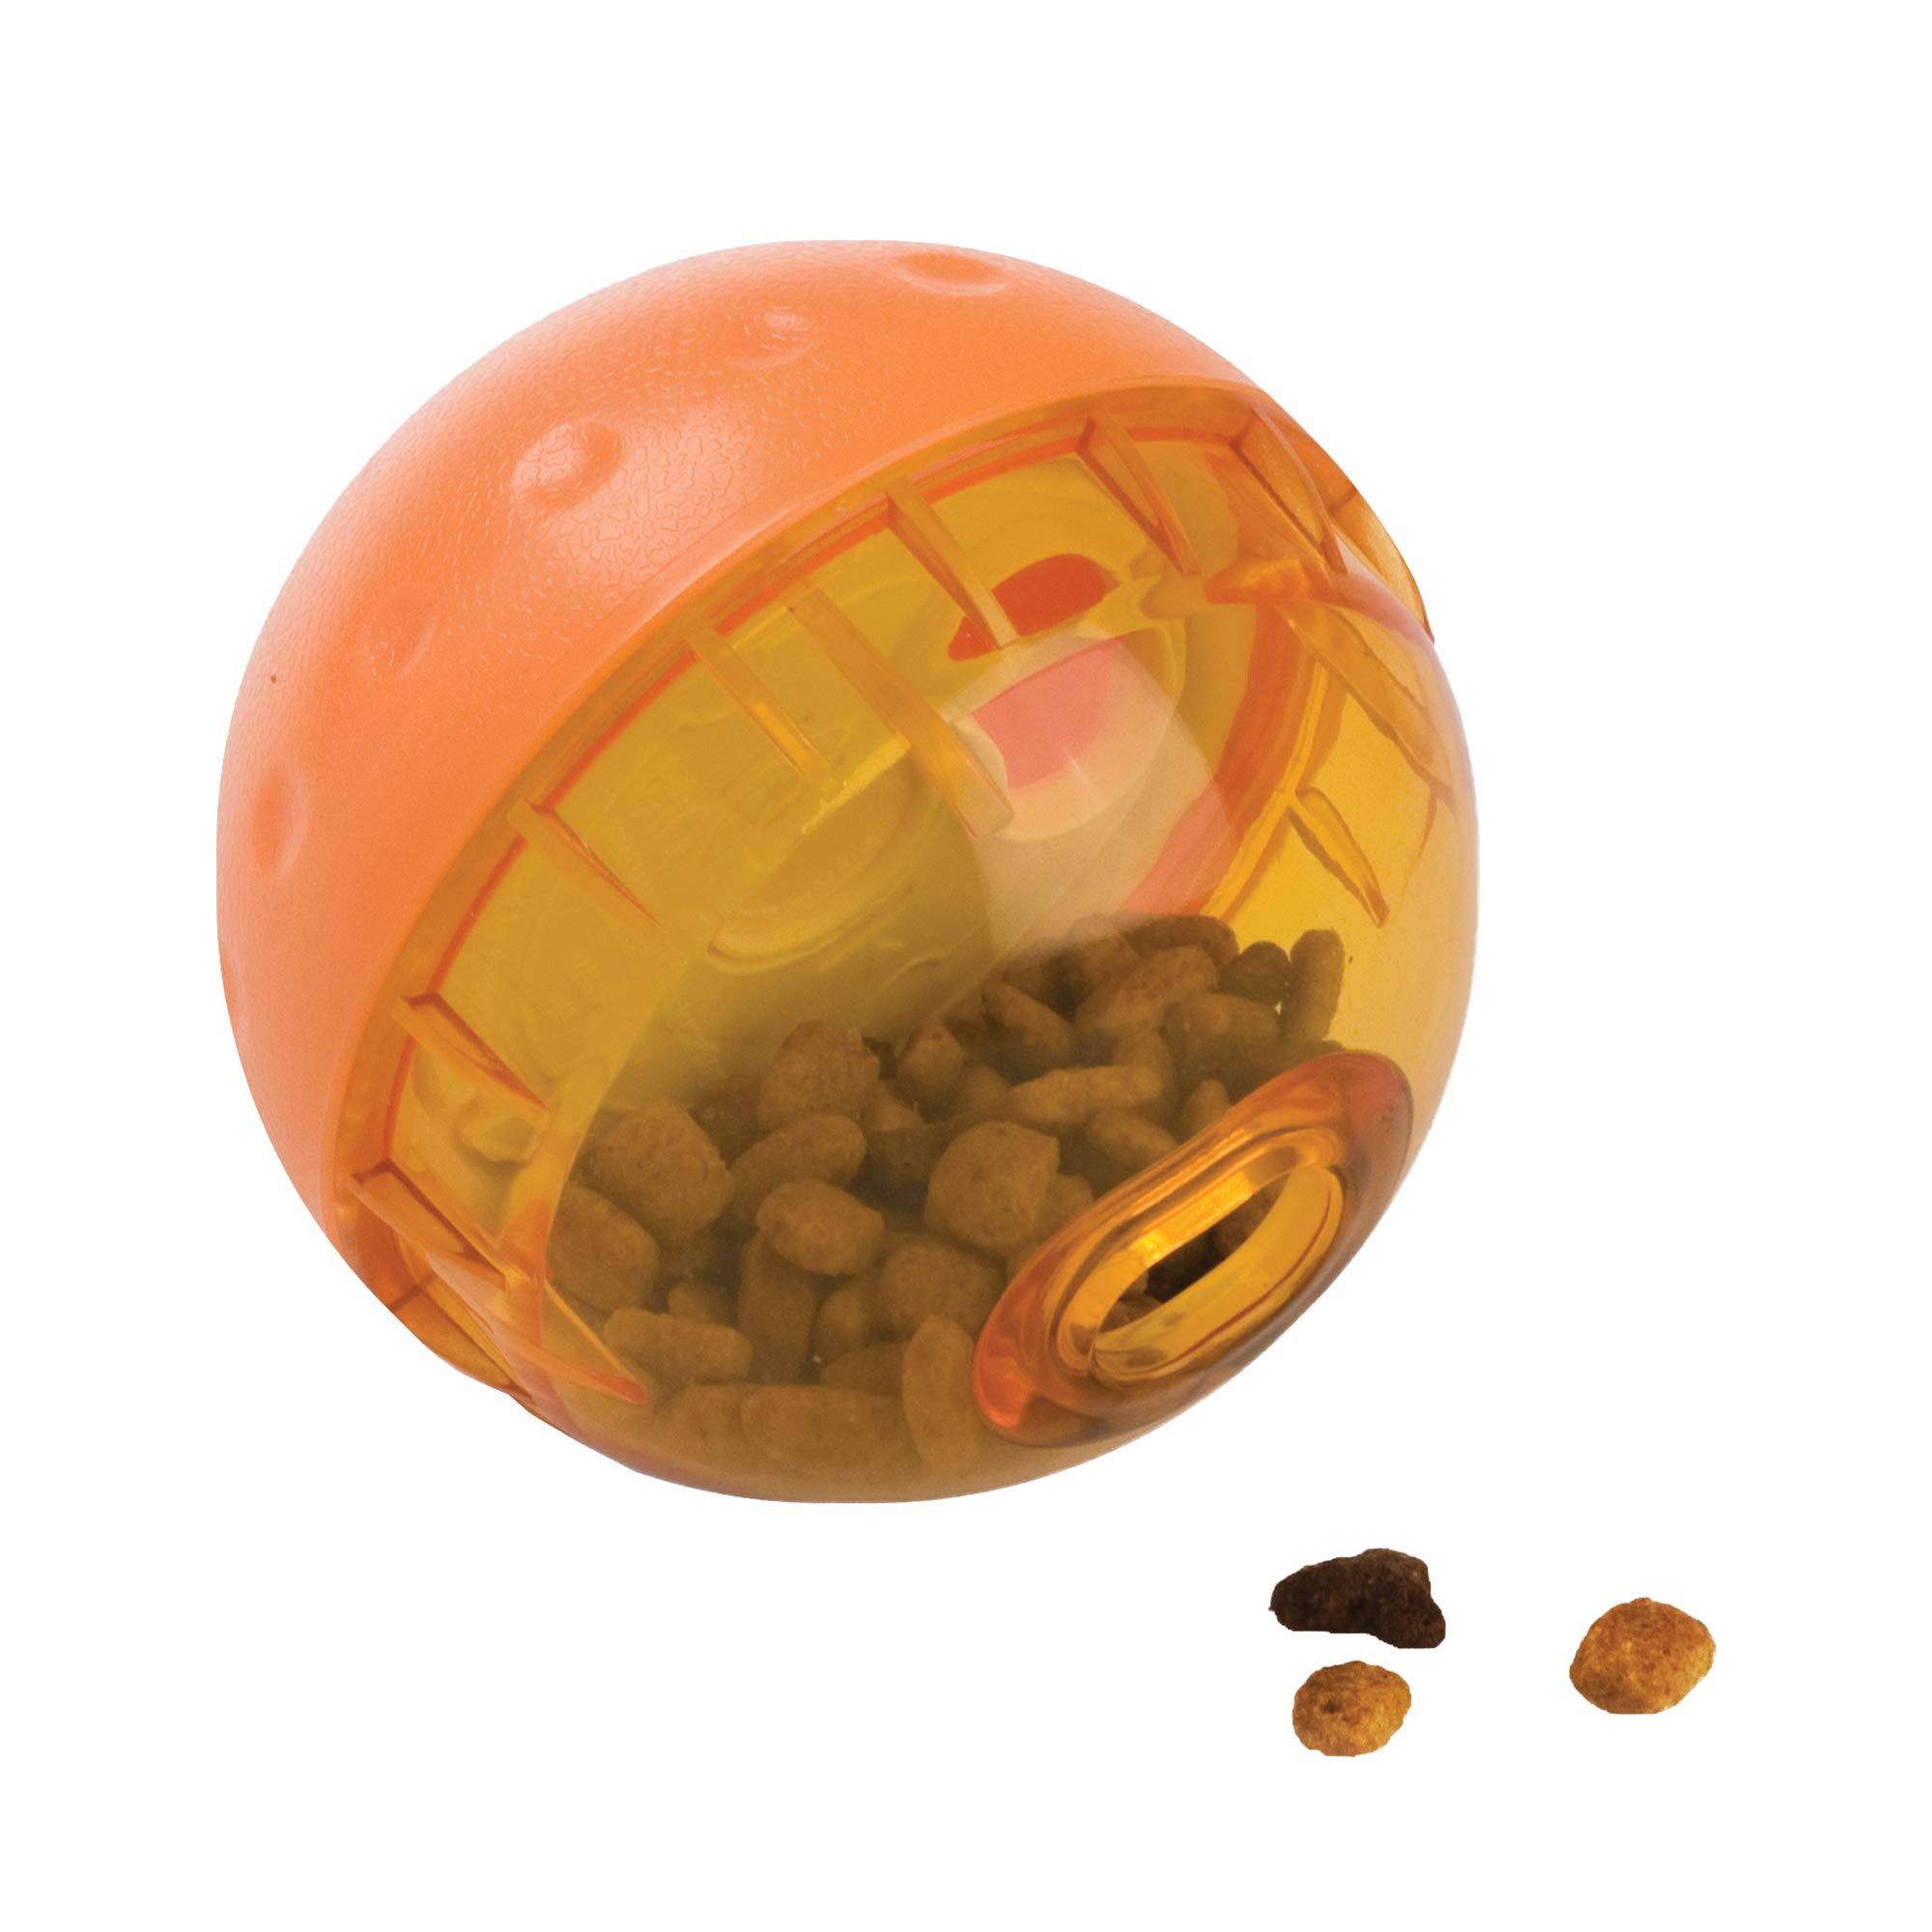 Interactive Dog Treat Ball & Toy for Enrichment | Dispensing Puzzle Toy for Dogs